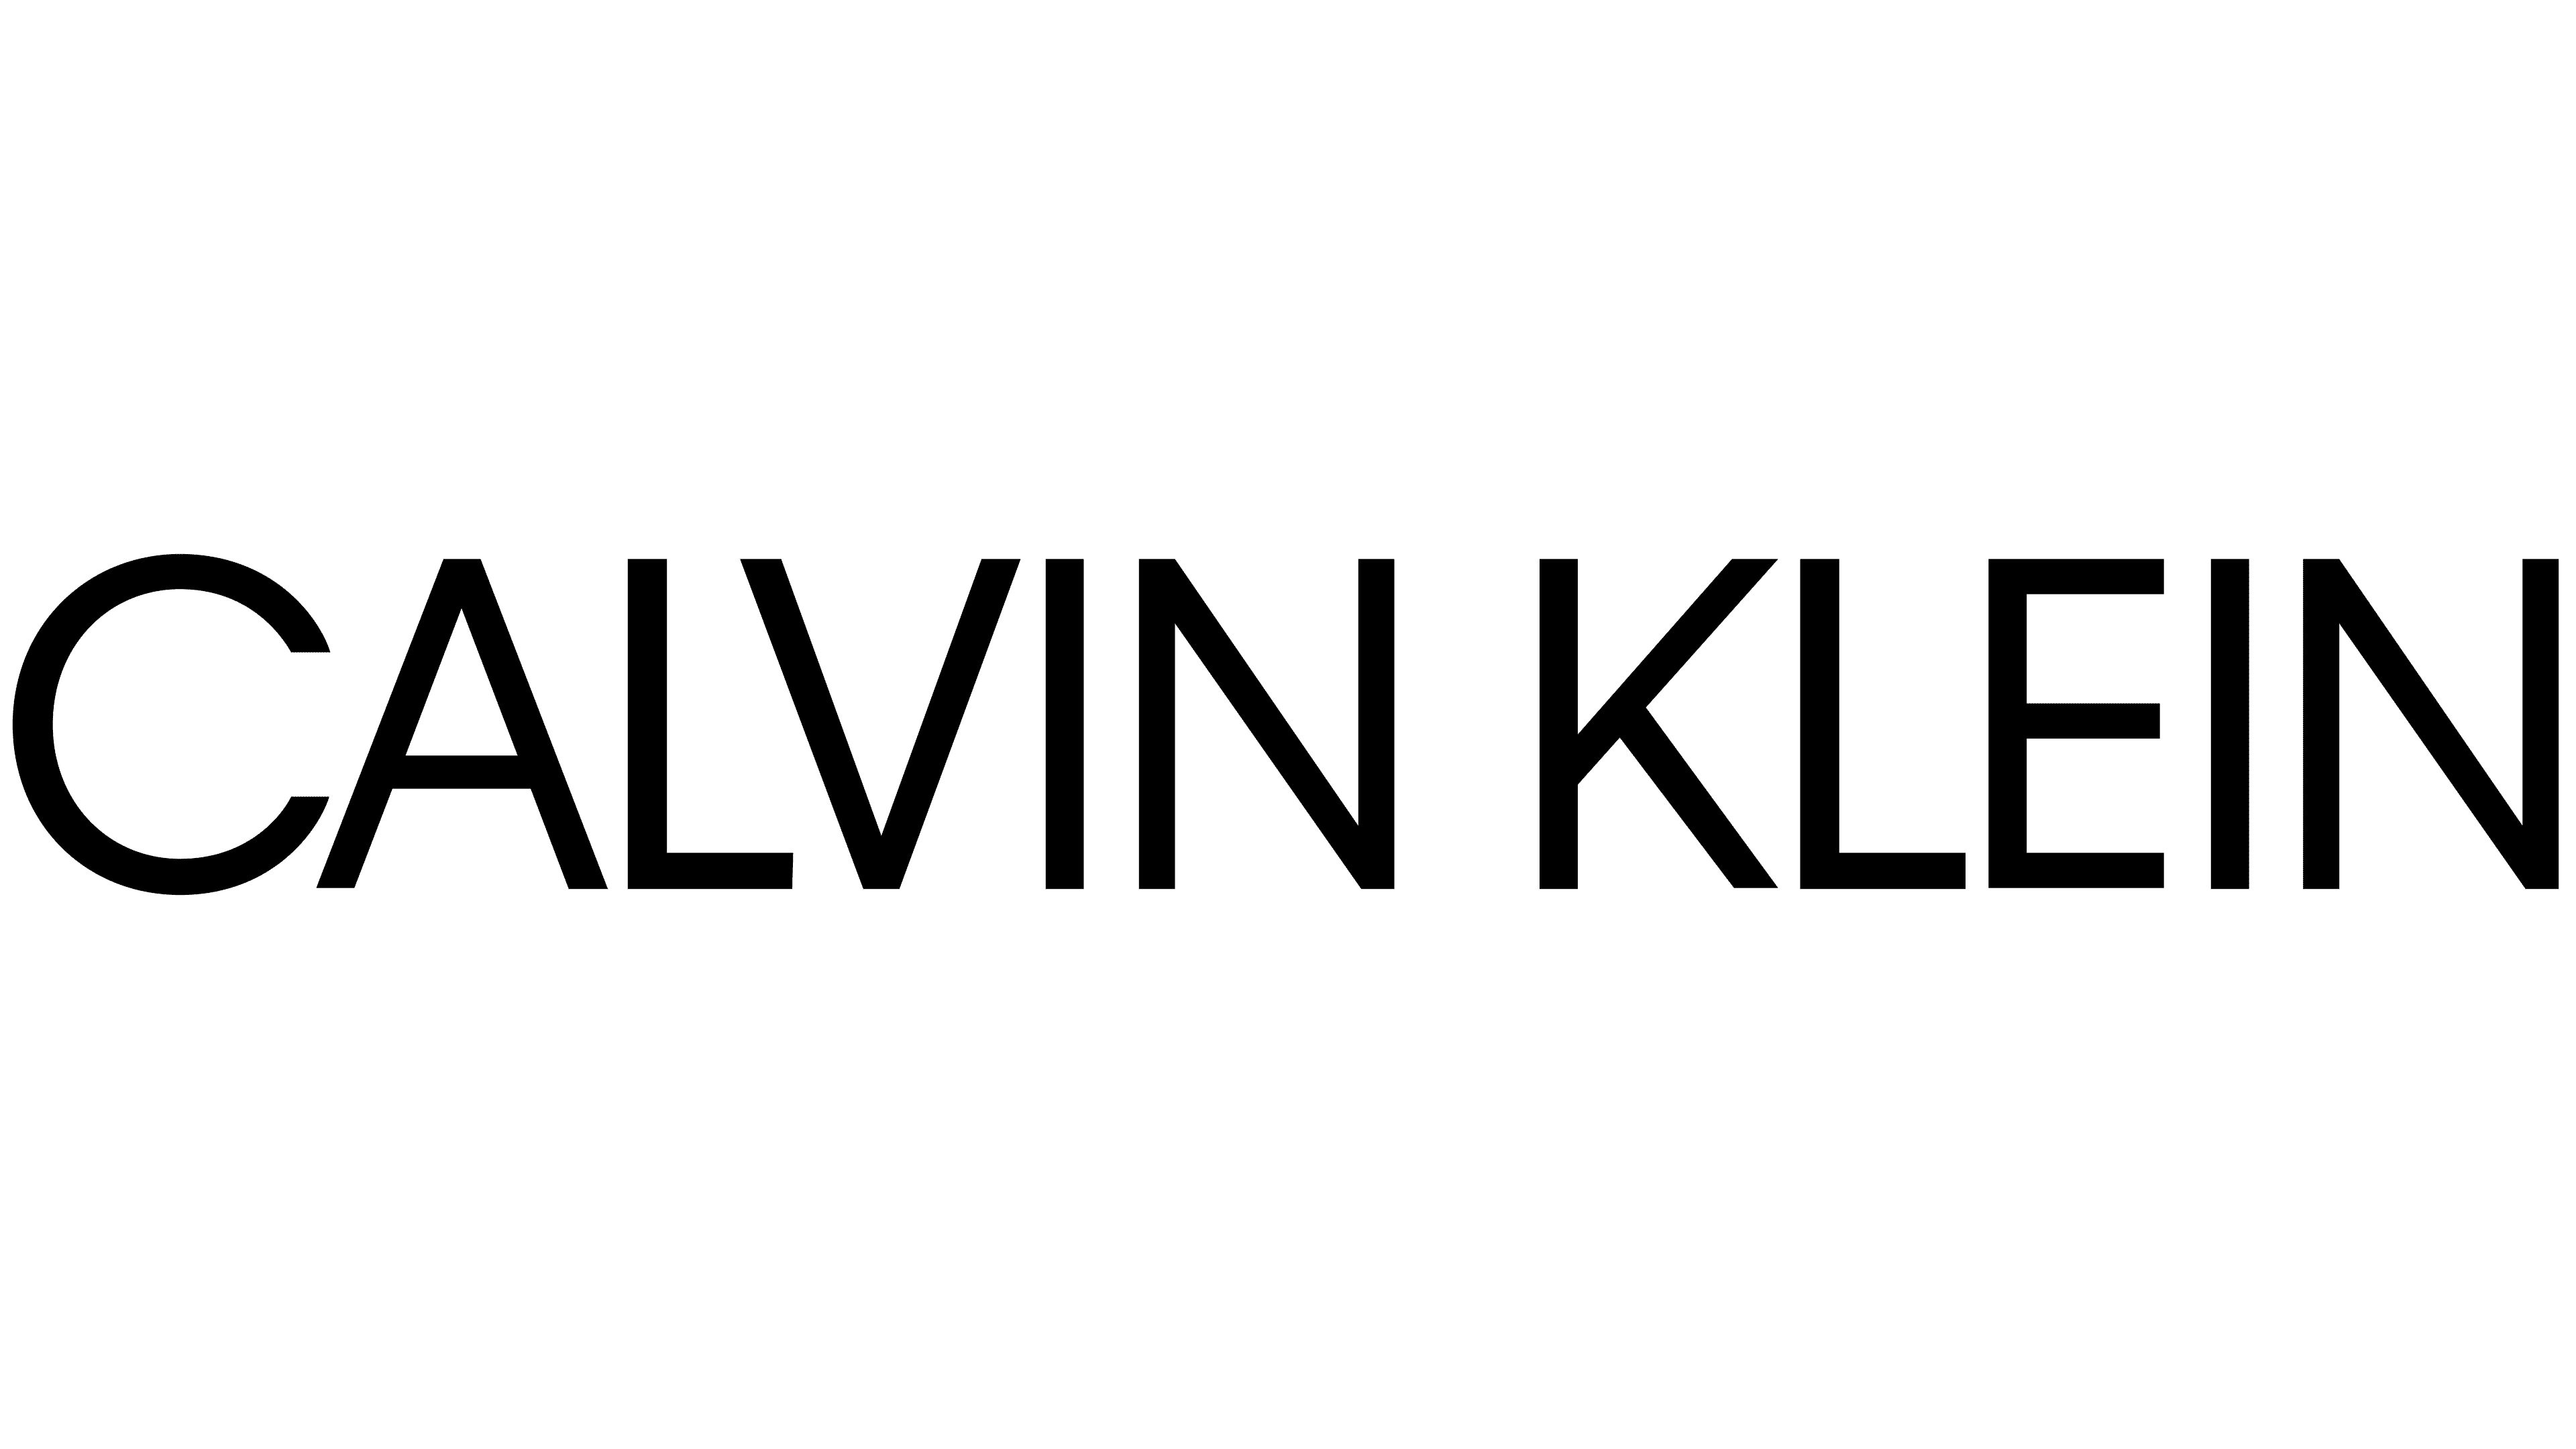 Calvin history, PNG, and brand Logo meaning, Klein symbol,